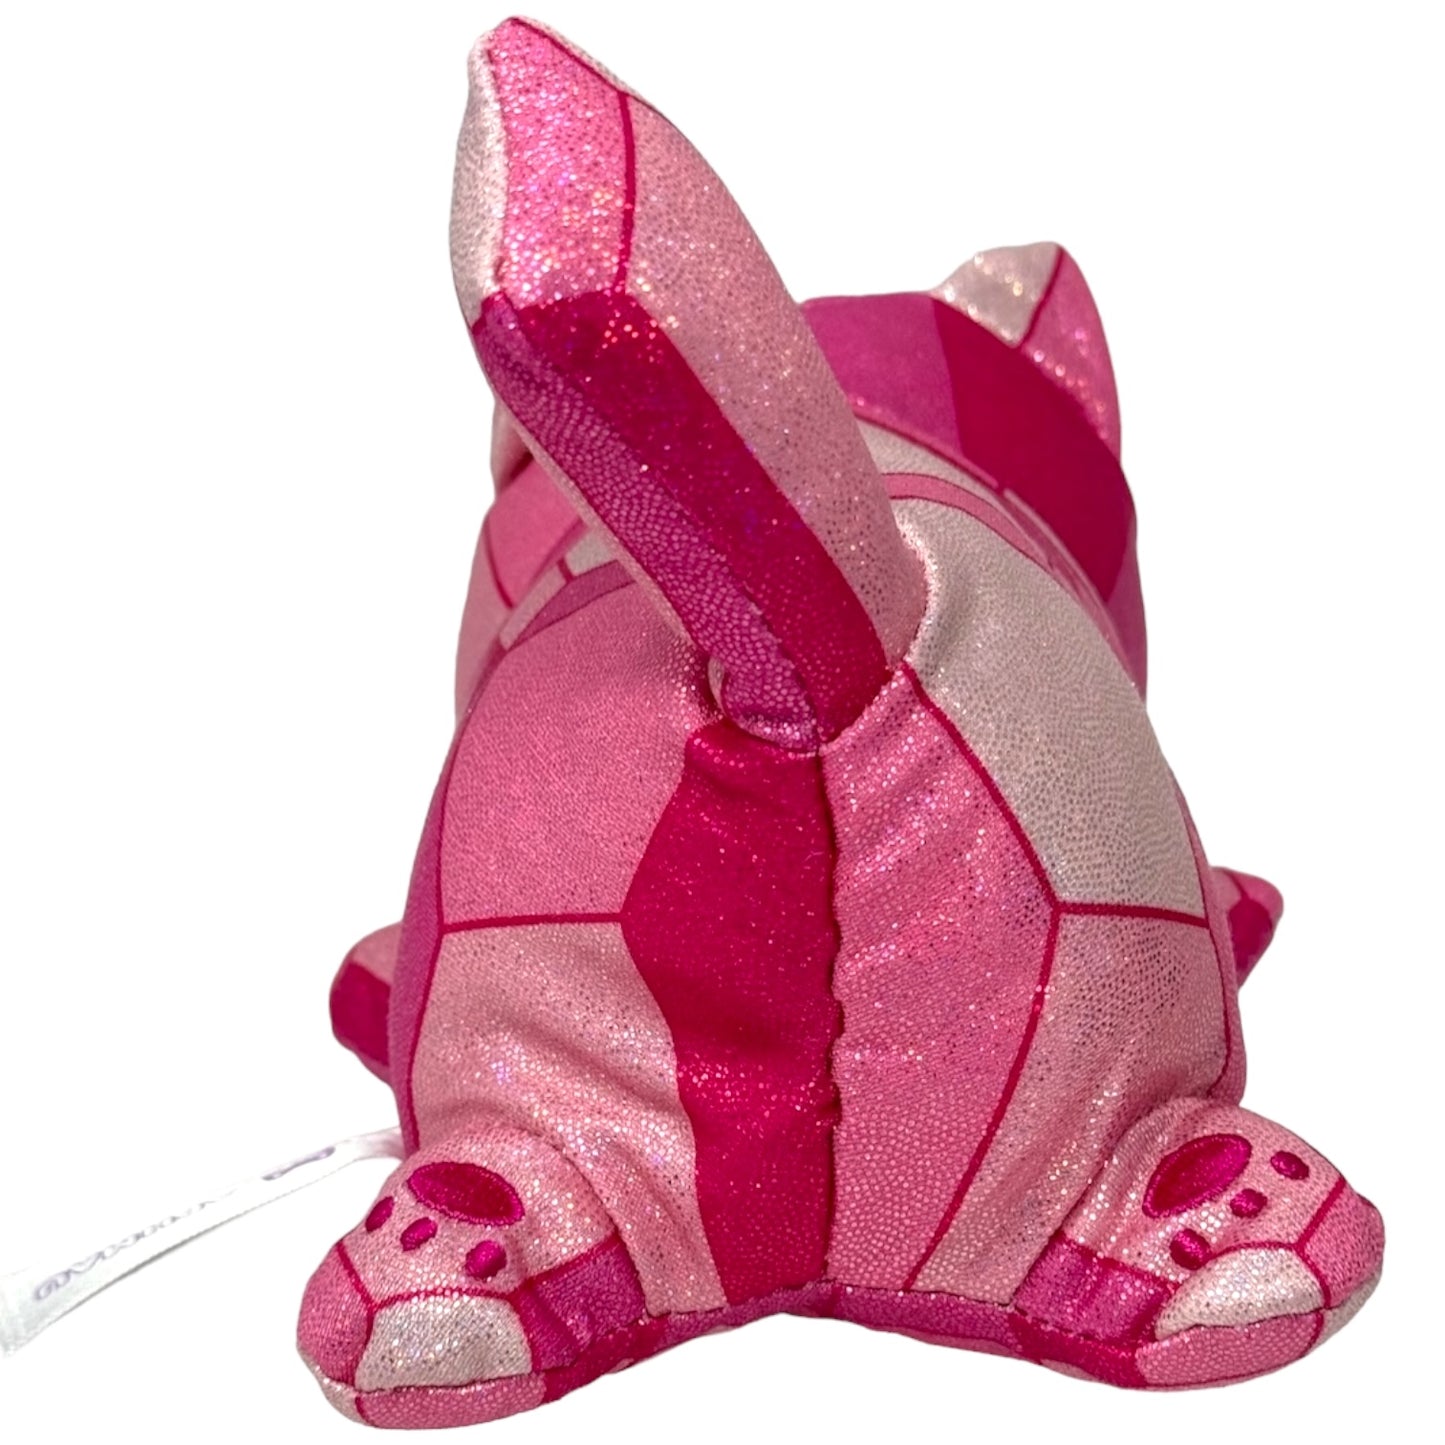 ROSE QUARTZ CAT - MeeMeows Litter 4 from Aphmau (NEW) HTF Claire's Exclusive!